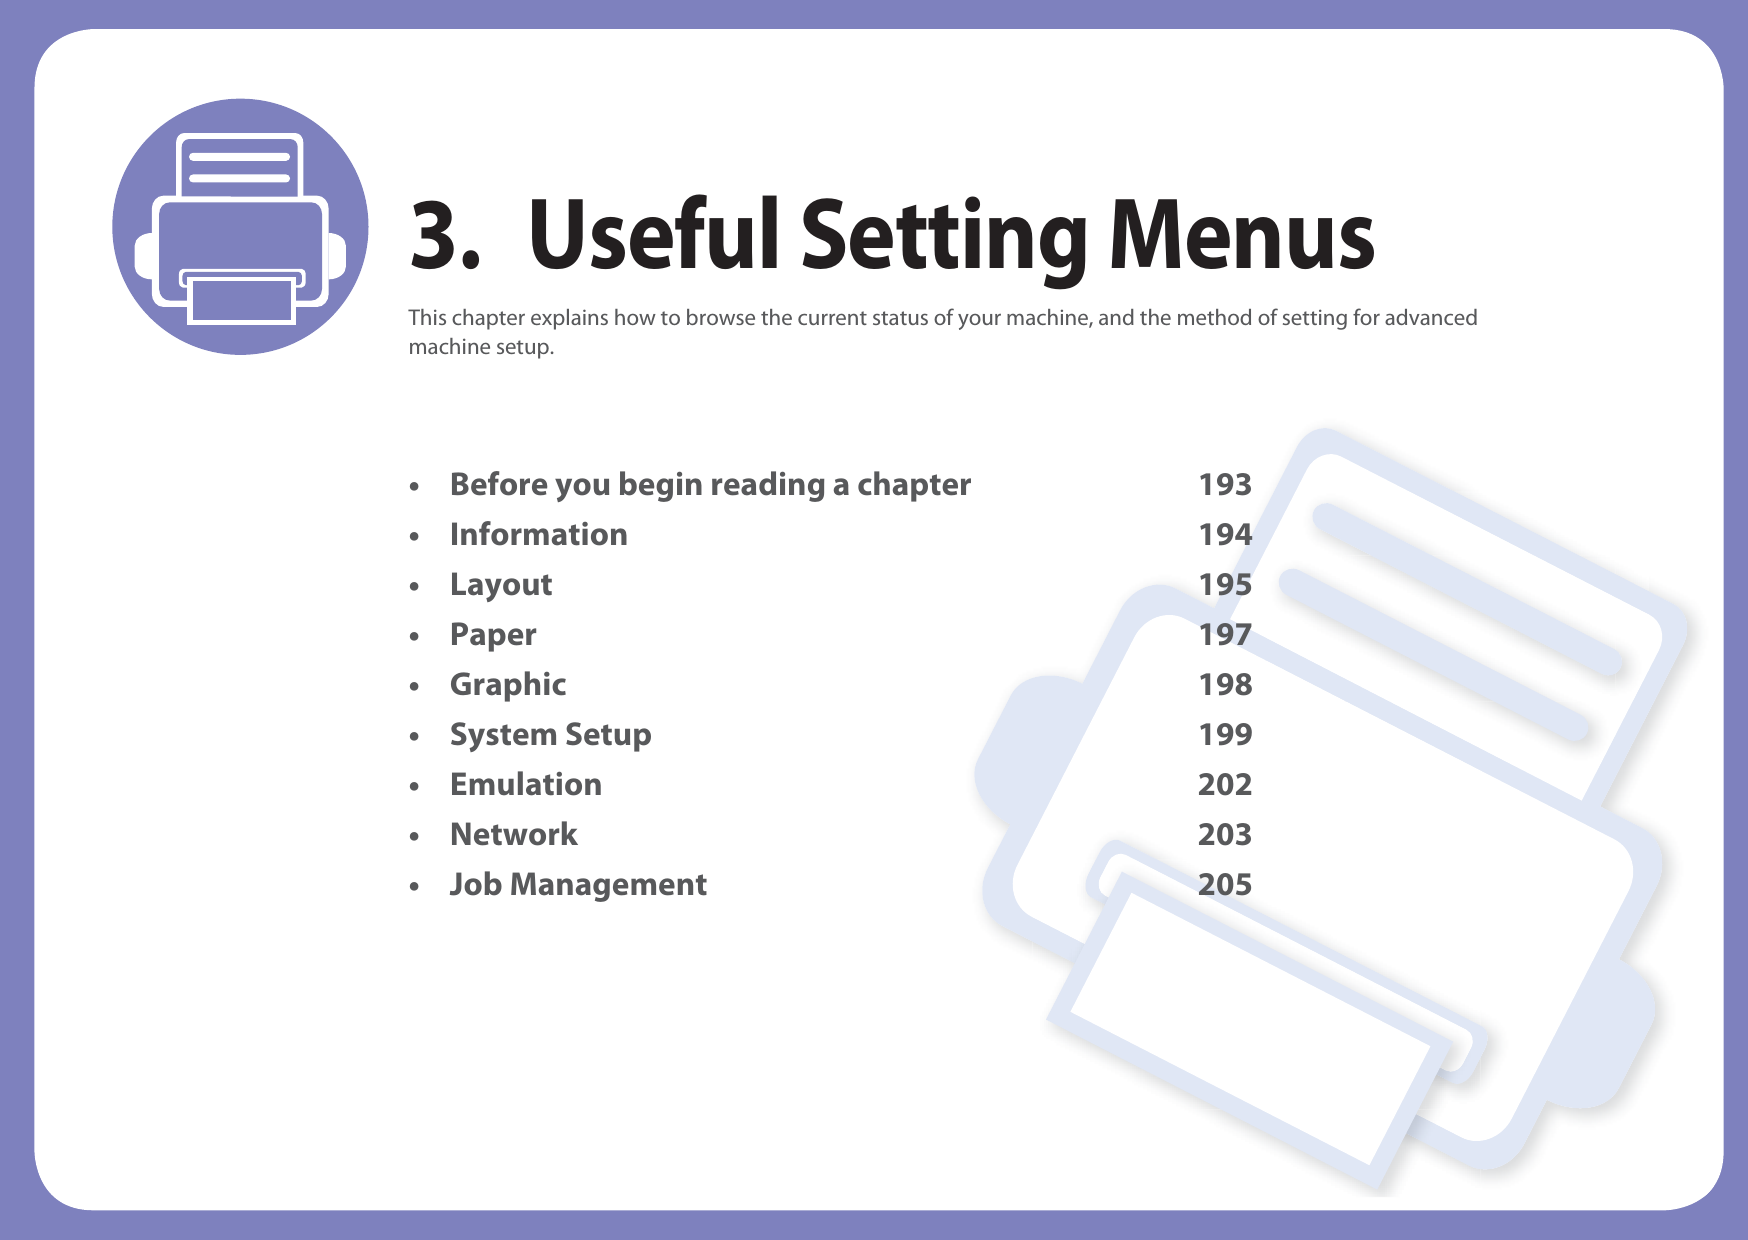 3. Useful Setting MenusThis chapter explains how to browse the current status of your machine, and the method of setting for advanced machine setup. • Before you begin reading a chapter 193• Information 194• Layout 195 • Paper 197• Graphic 198• System Setup 199• Emulation 202• Network 203• Job Management 205